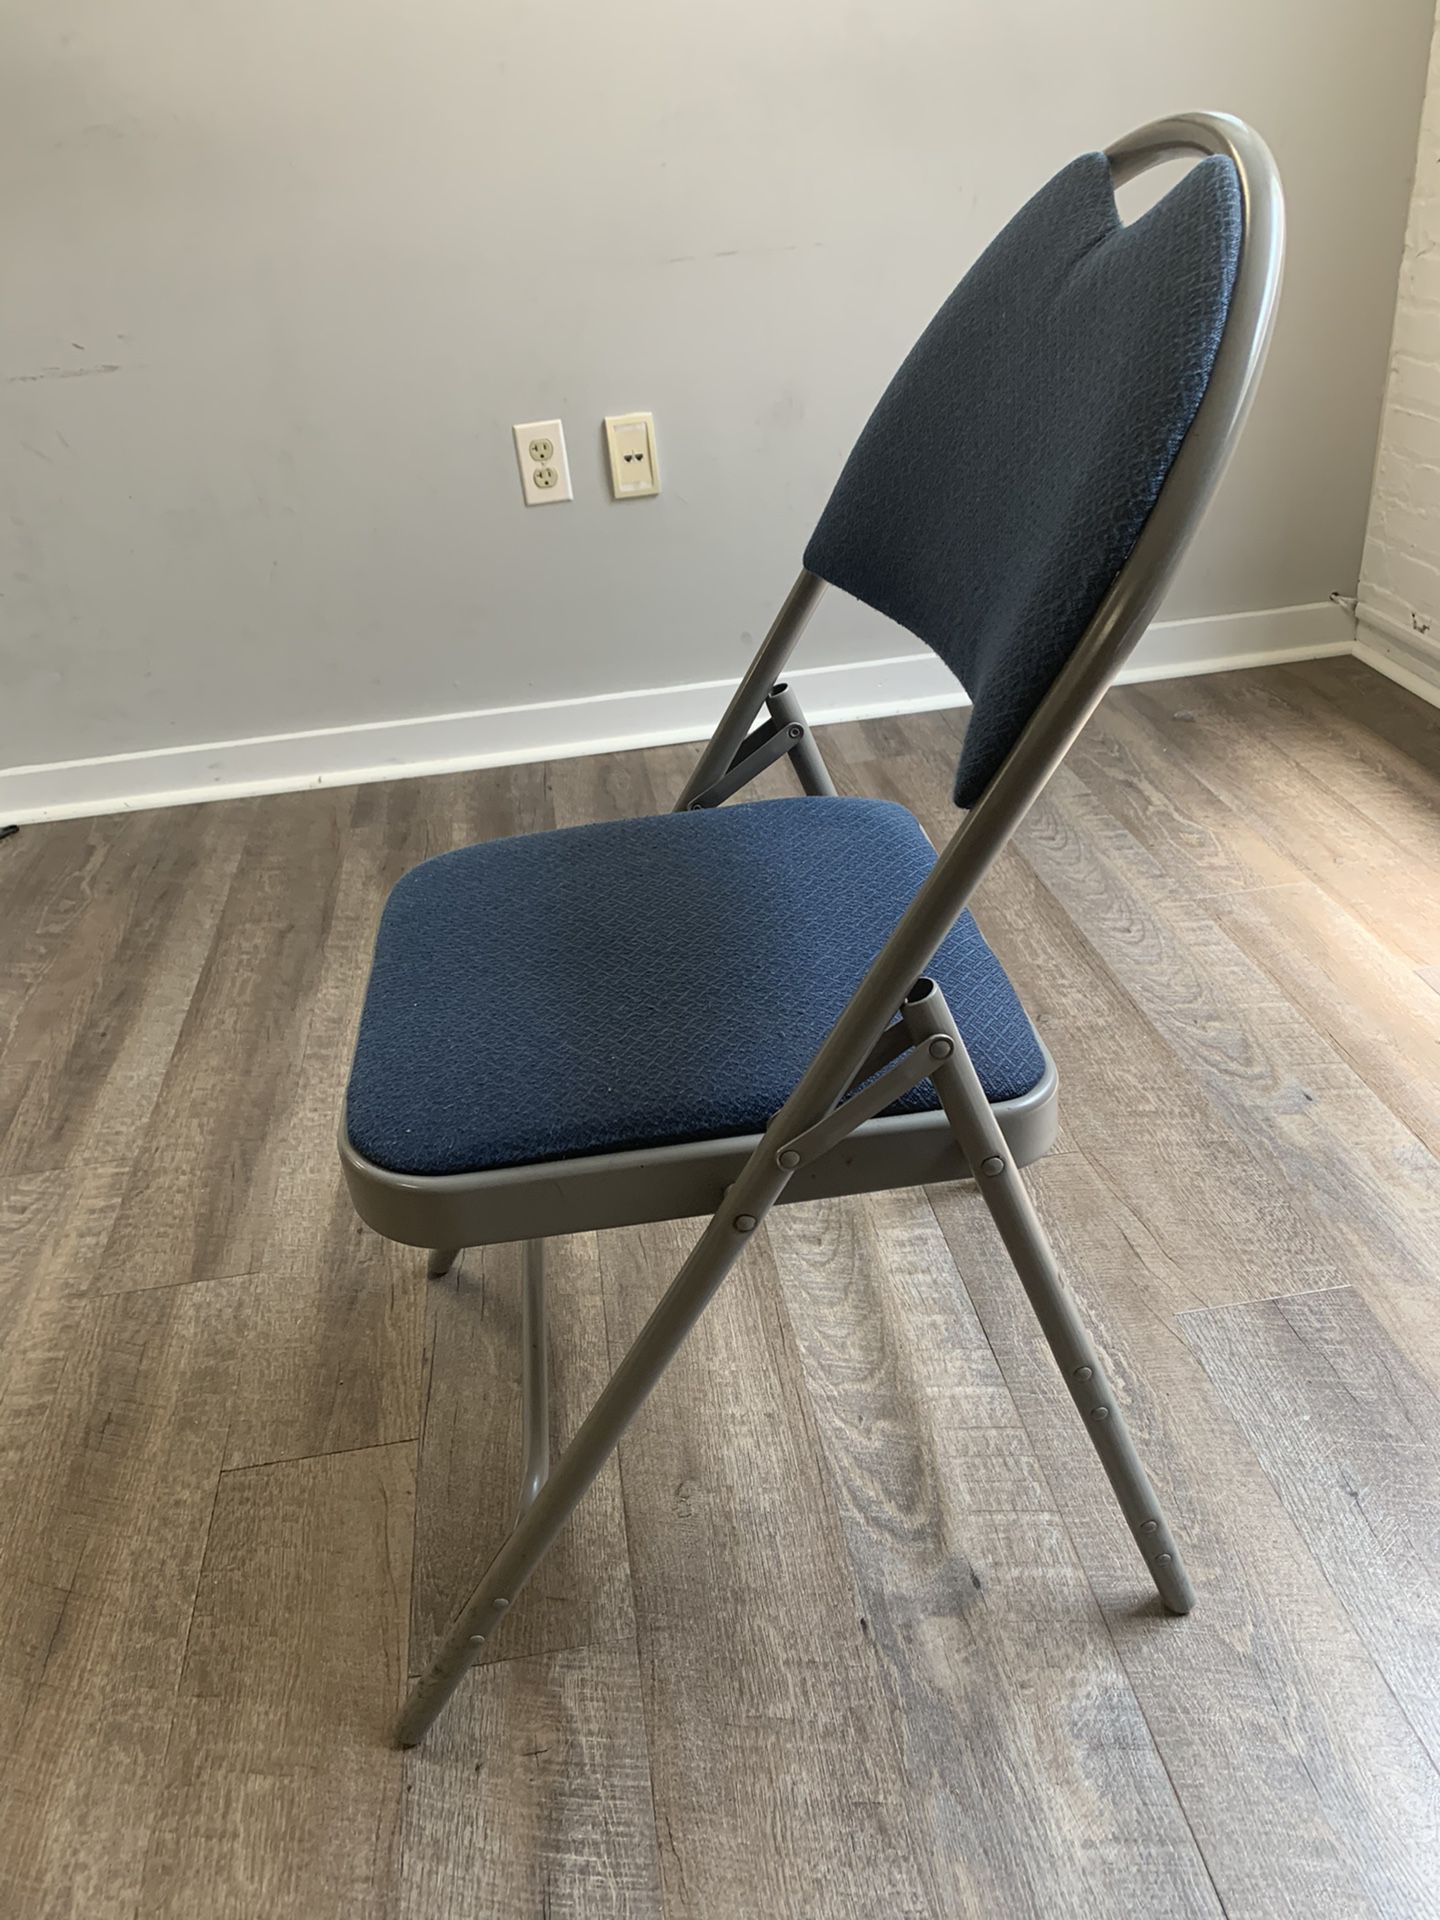 Durable folding chairs